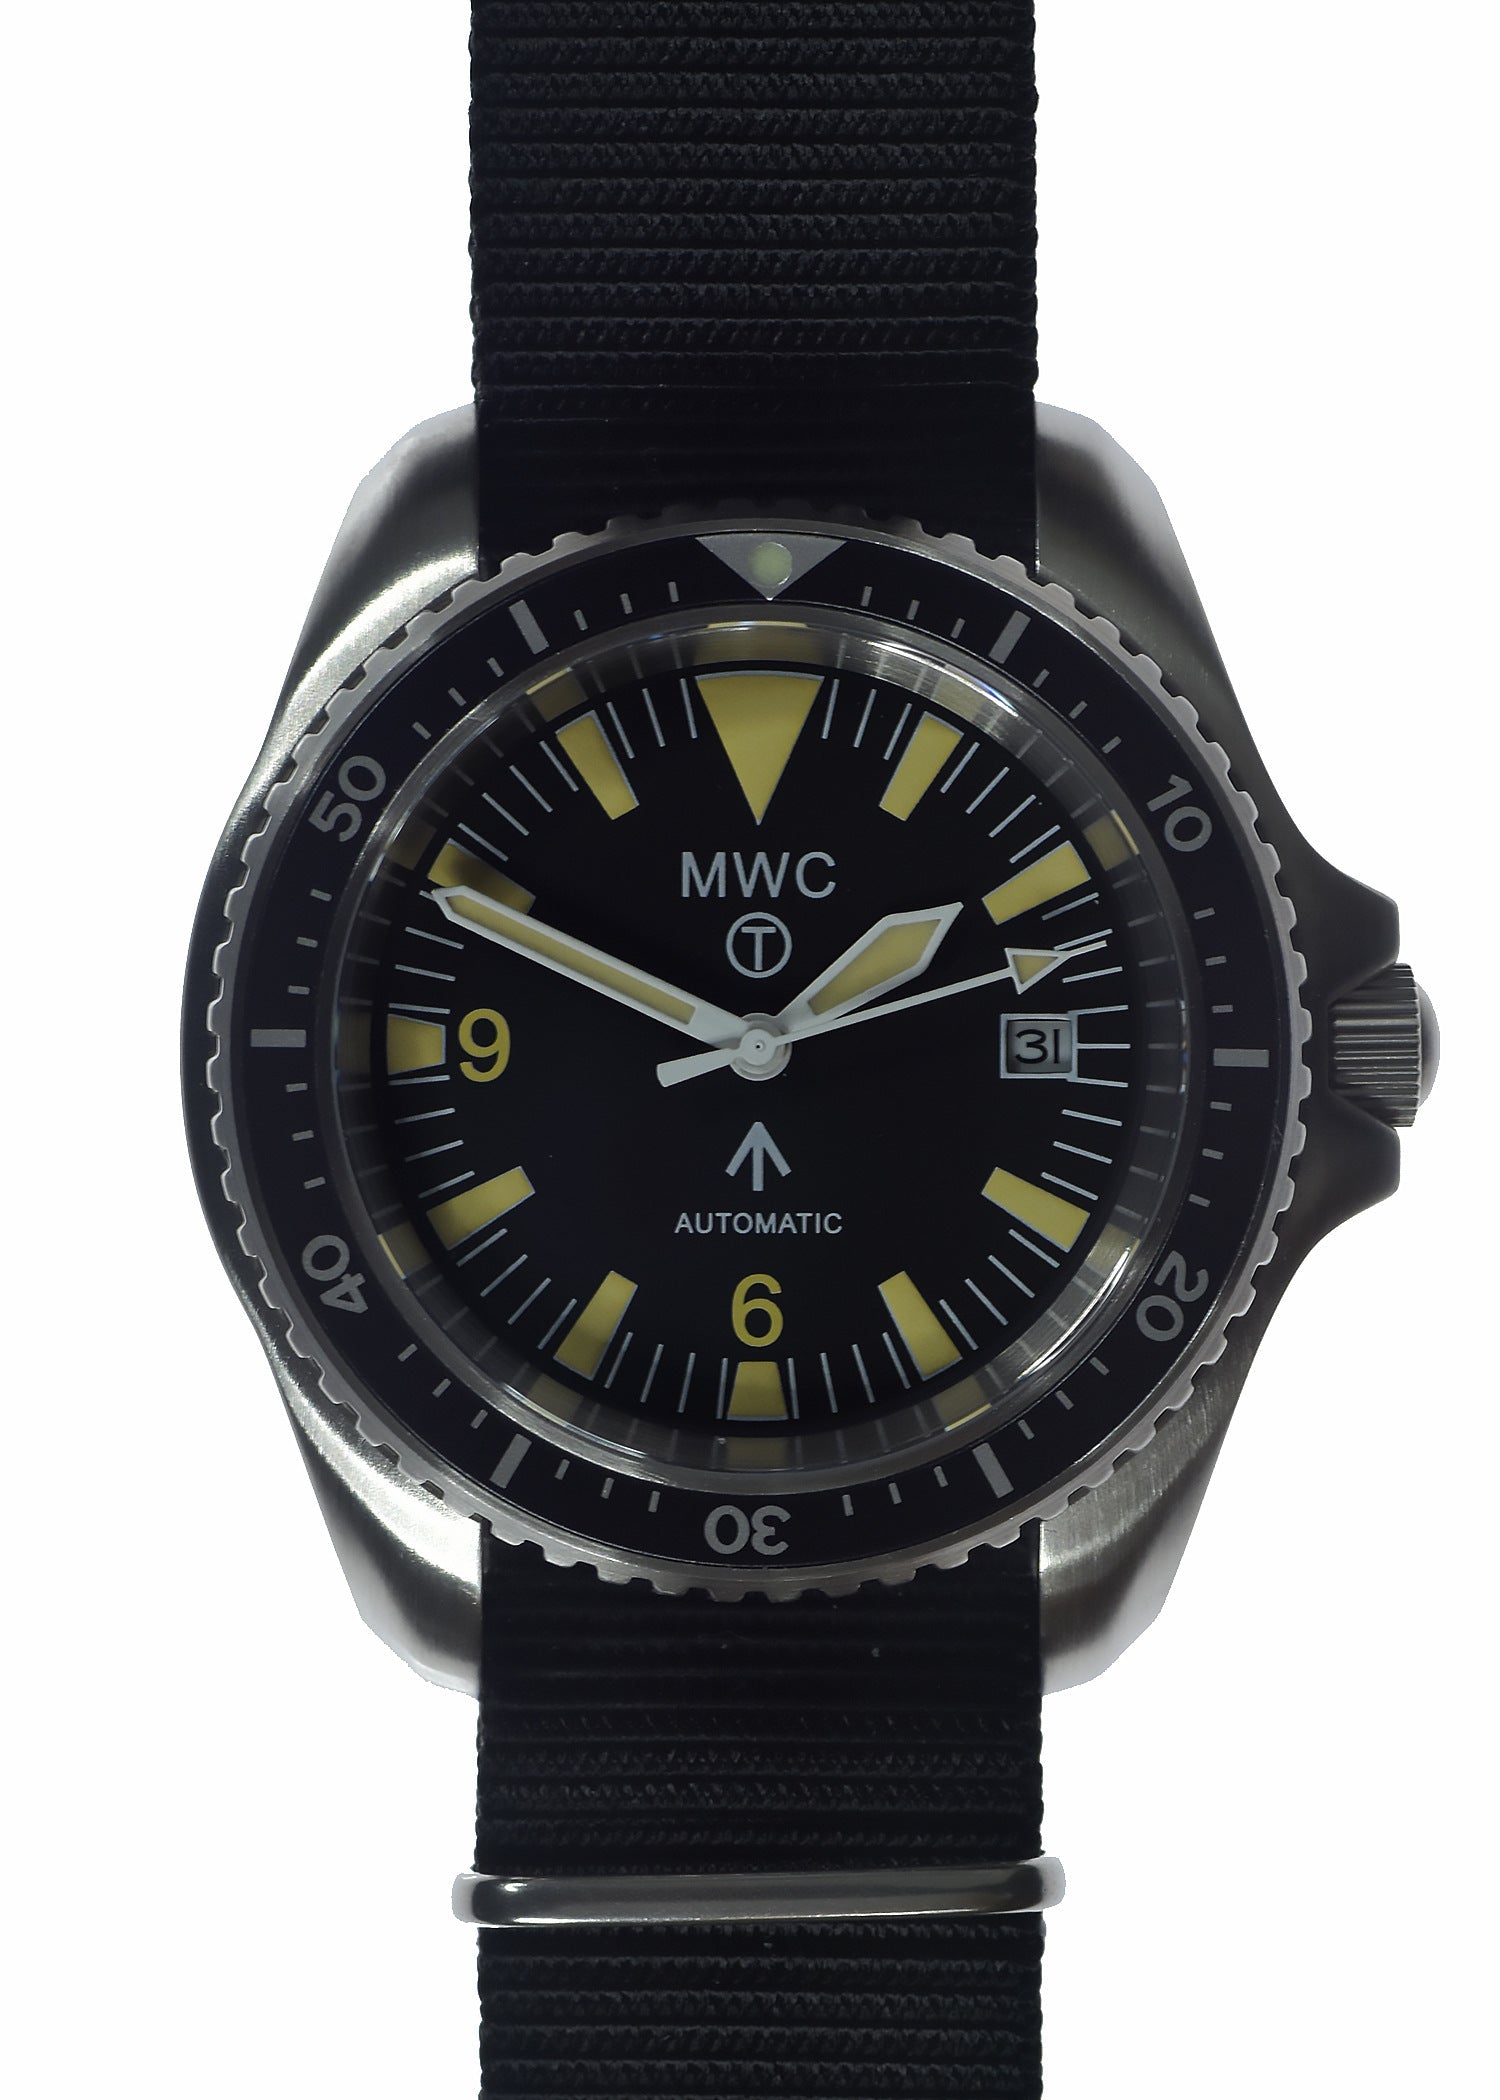 MWC Watches-1999-2001 300m Diver pvd - YouTube